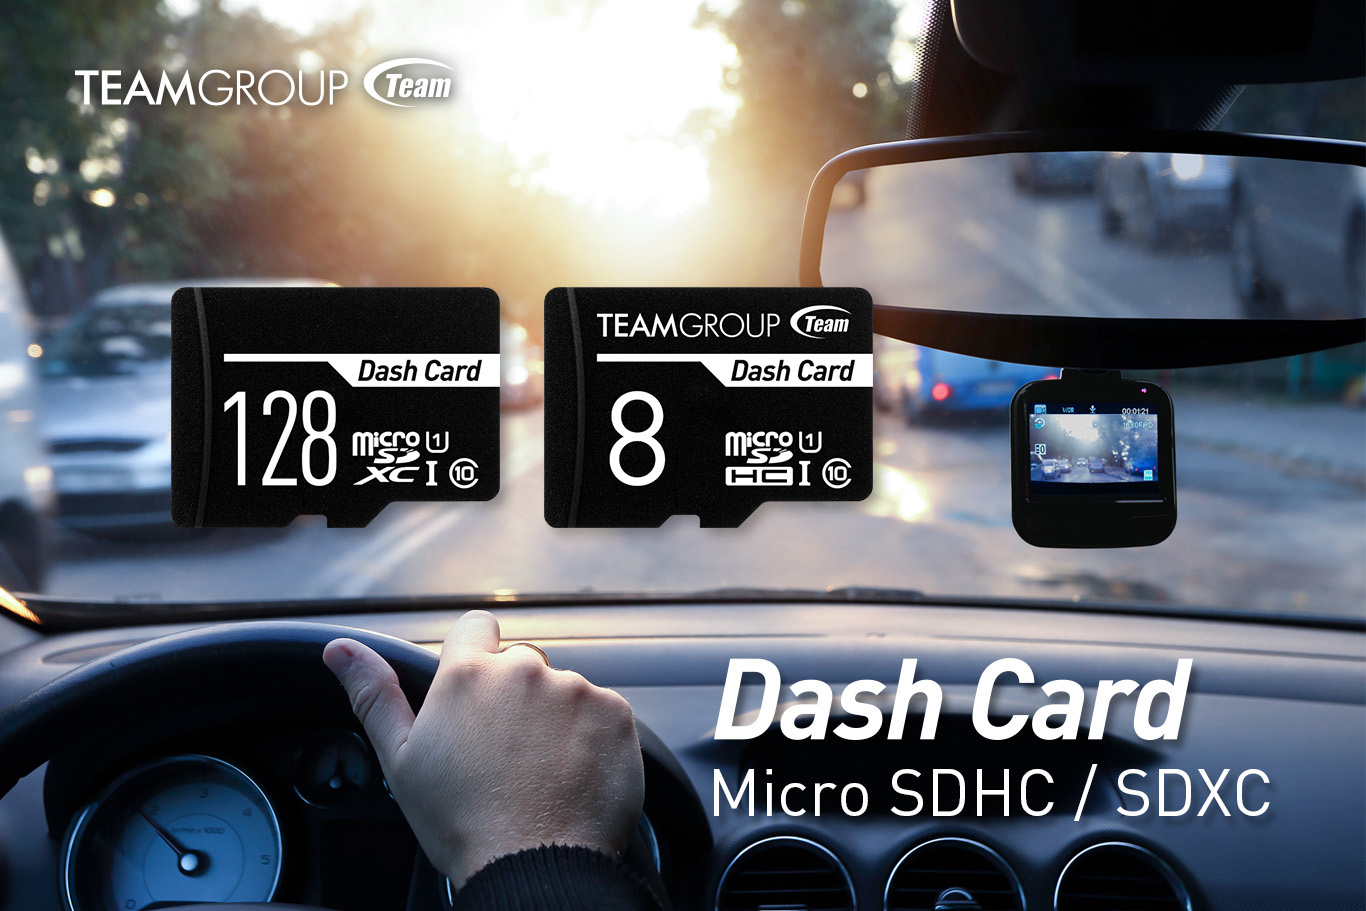 Team Group Dash Cards Along with a Background Image of a 1st Person Perspective of a Person Driving, and Text That Reads: Dash Card Micro SDHC / SDXC